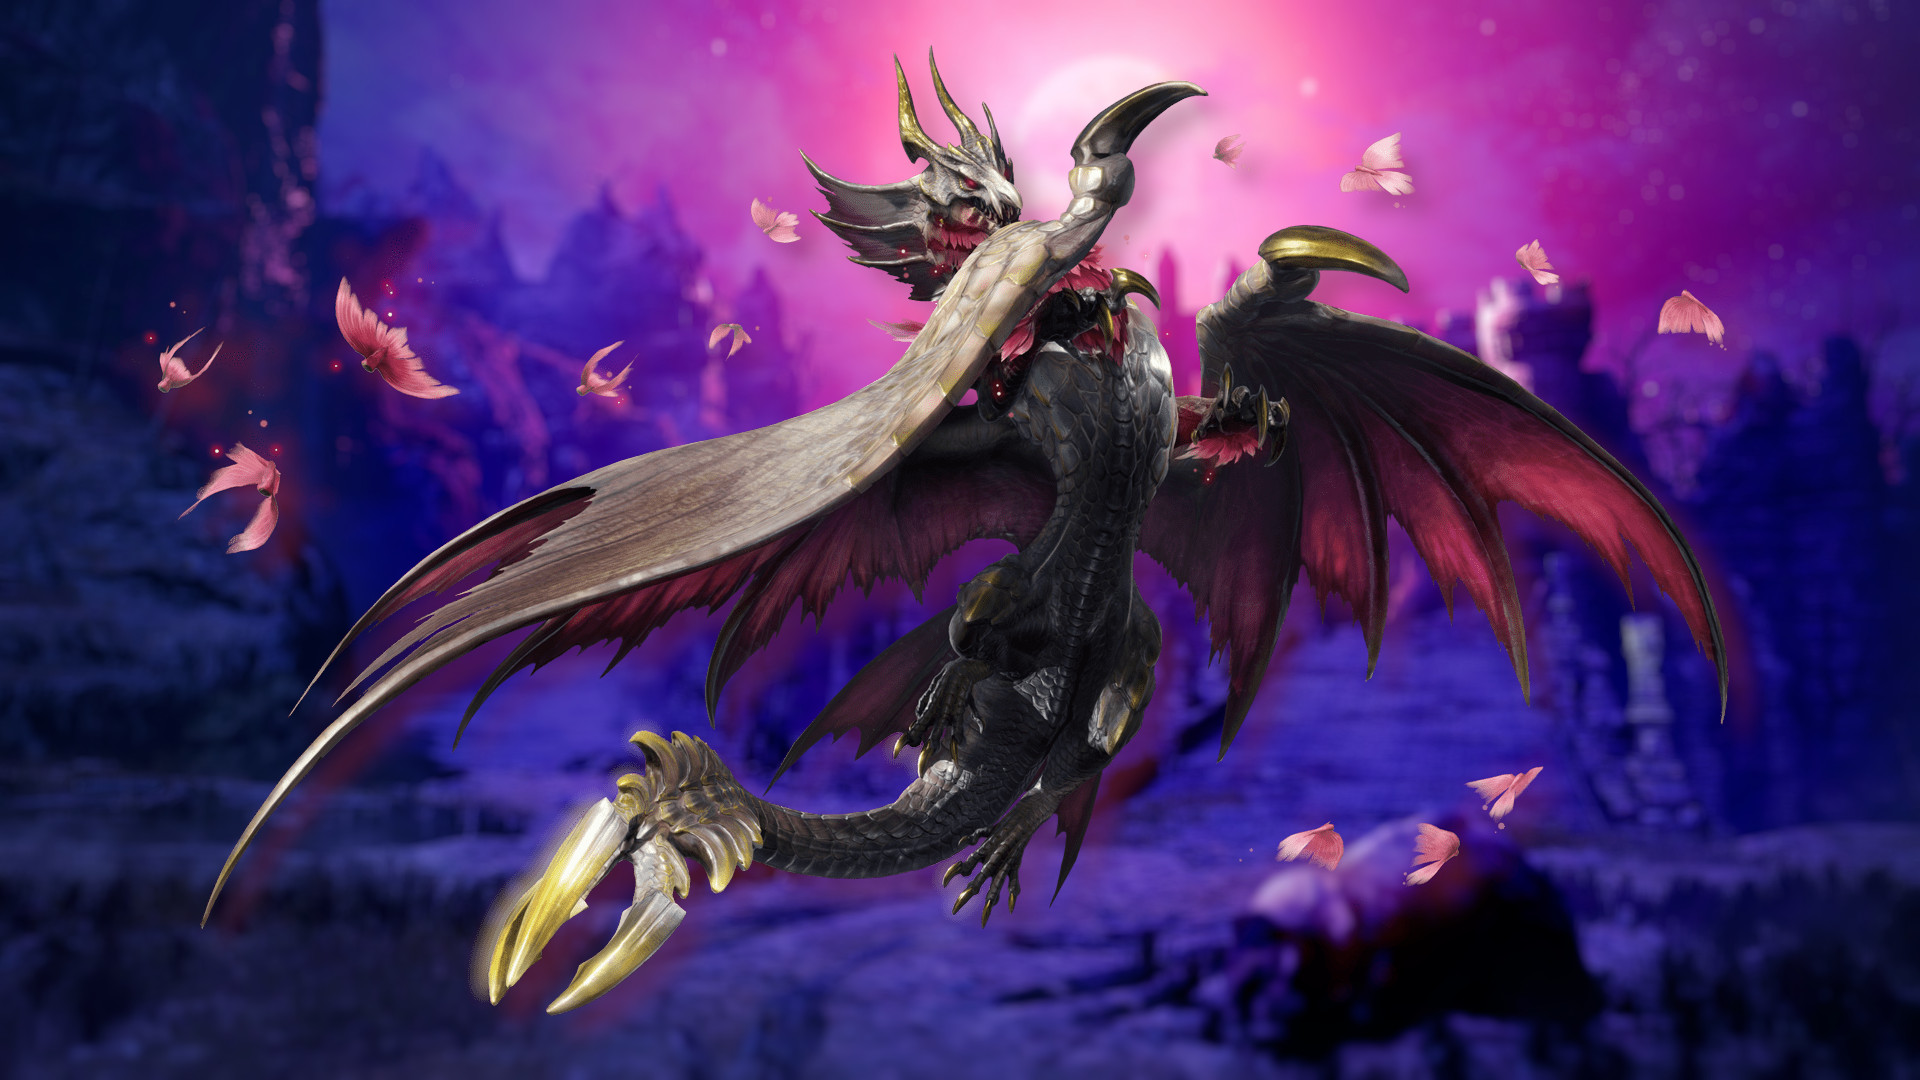 Monster Hunter Rise monsters – everything we know